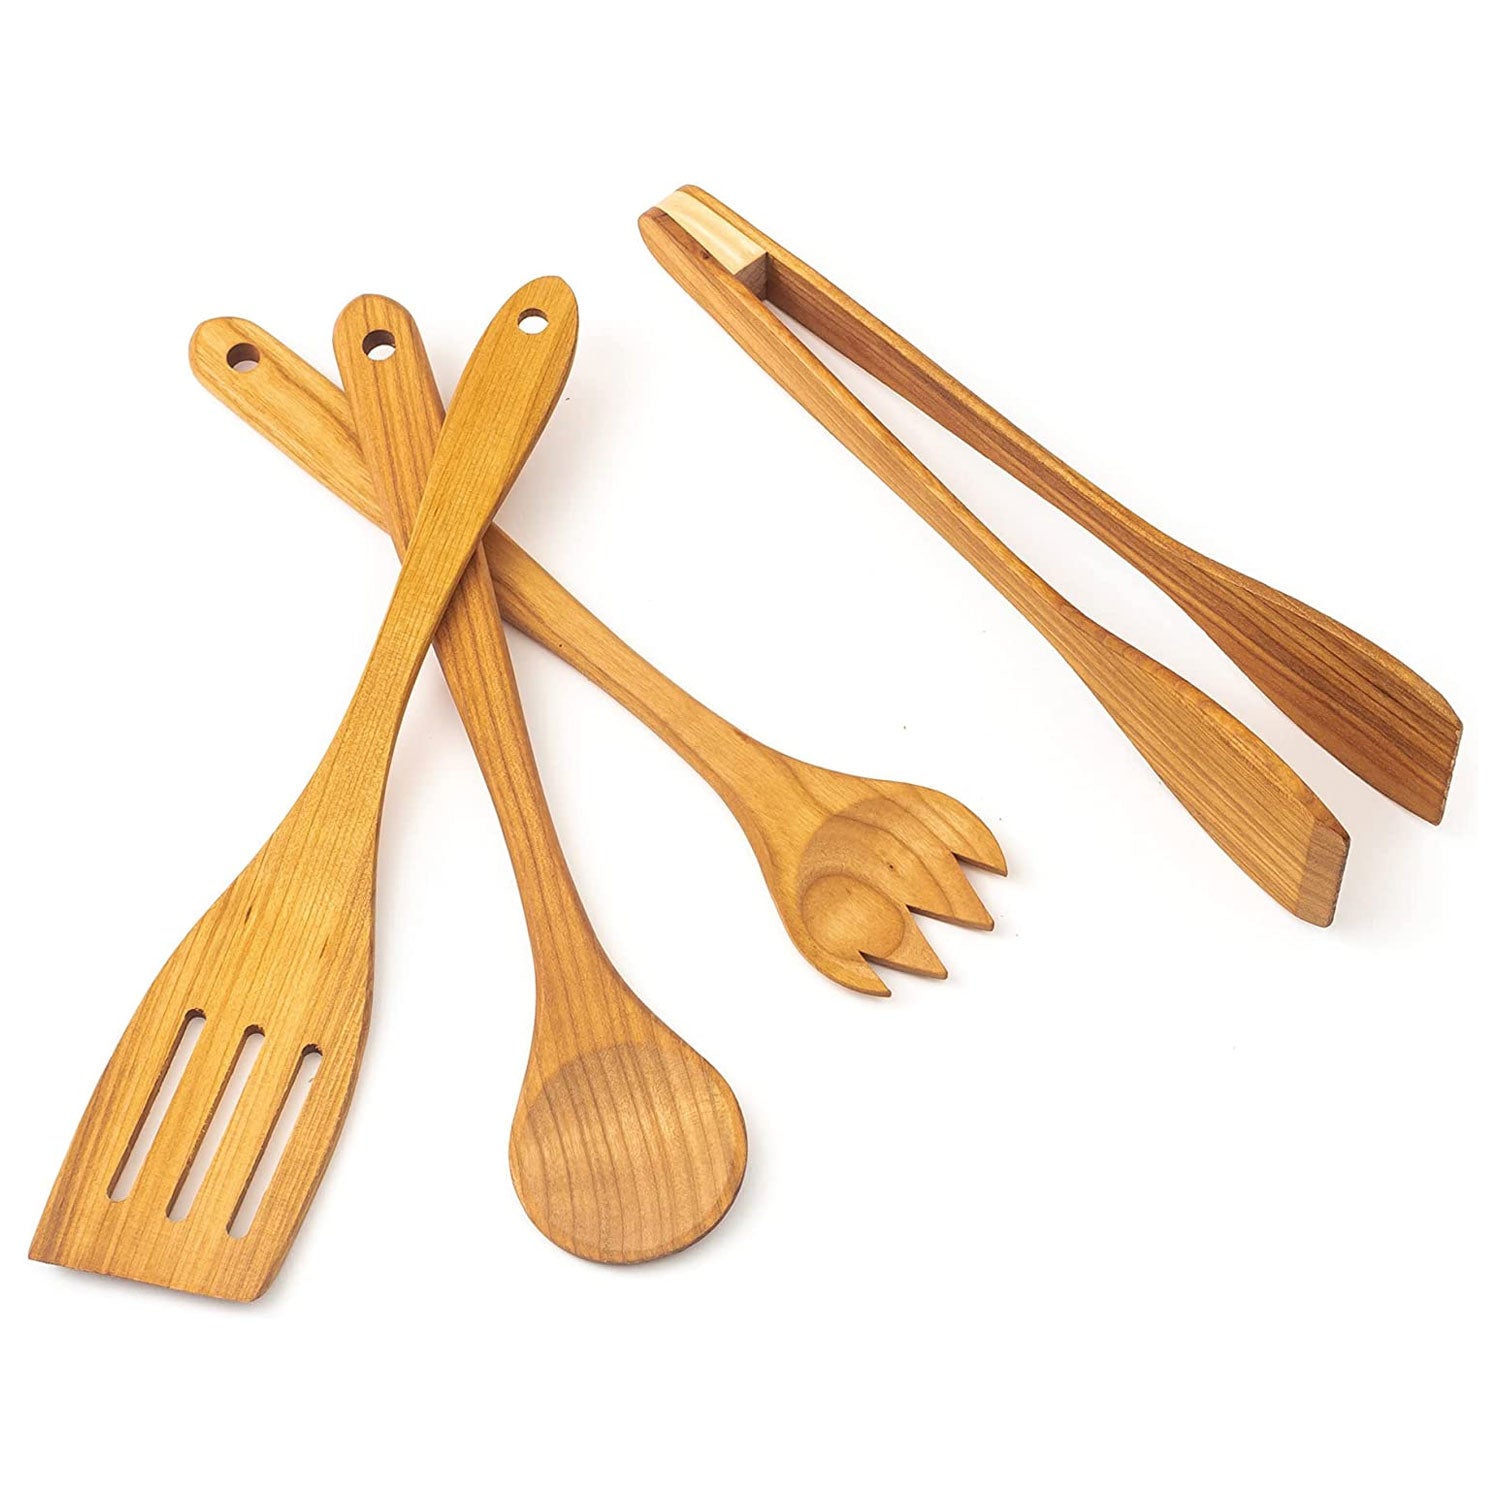 Seven Piece Cherry Wood Cooking Utensil Set by Four Leaf Woodshop